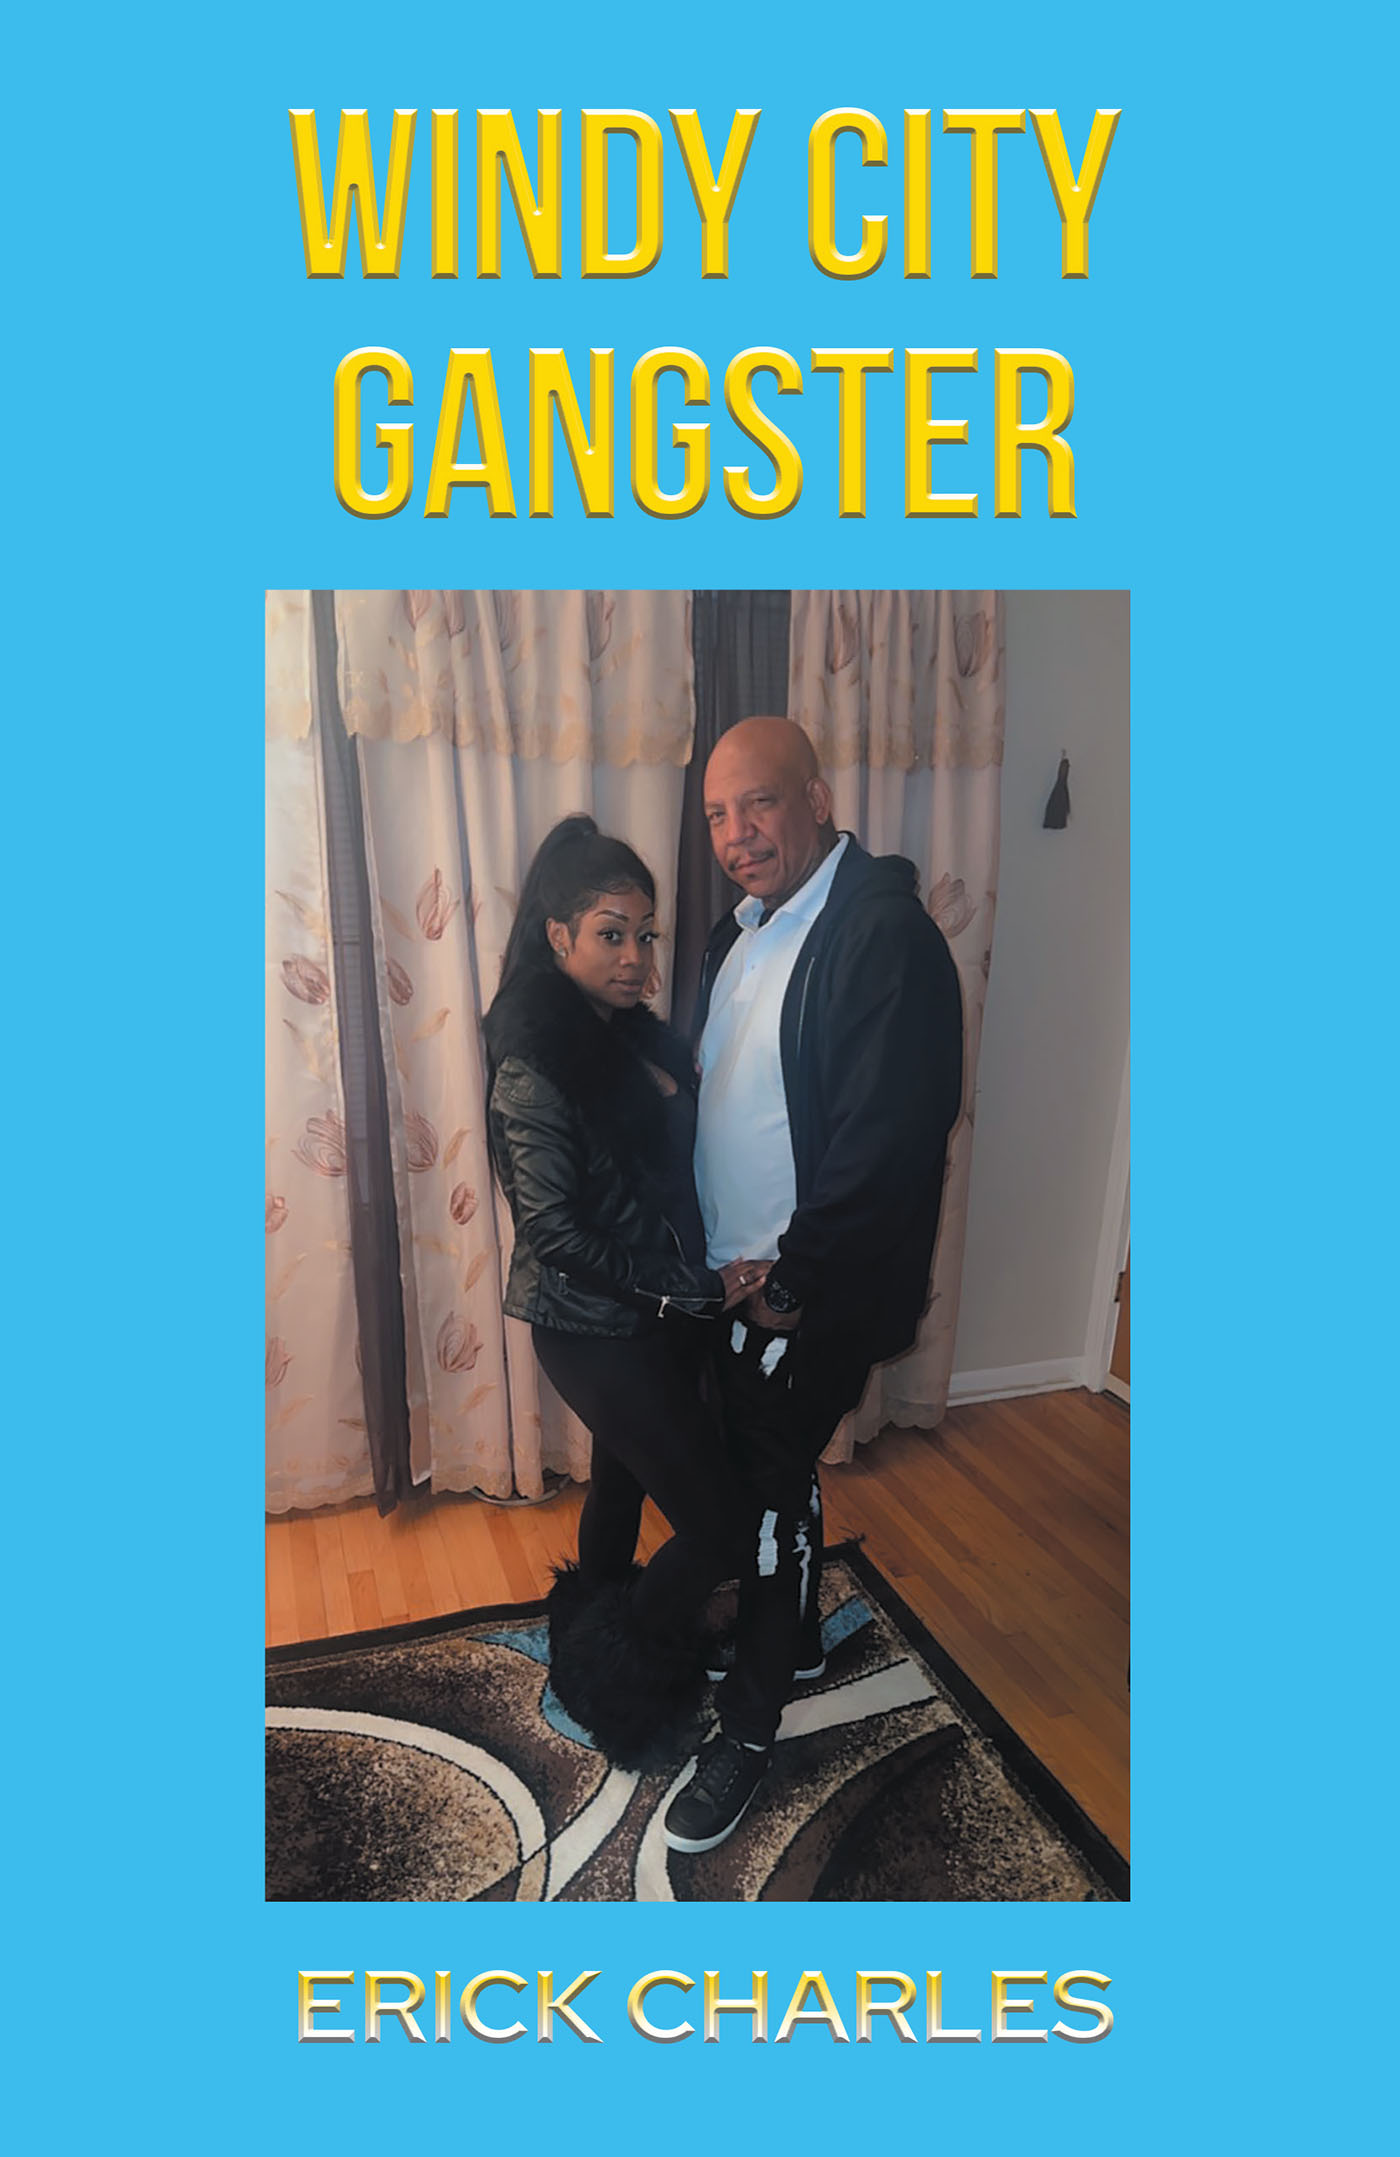 Author Erick Charles’s New Book, "Windy City Gangster," Shares the Author’s View of Life Growing Up in the Gang-Plagued Neighborhoods of Chicago’s North Side